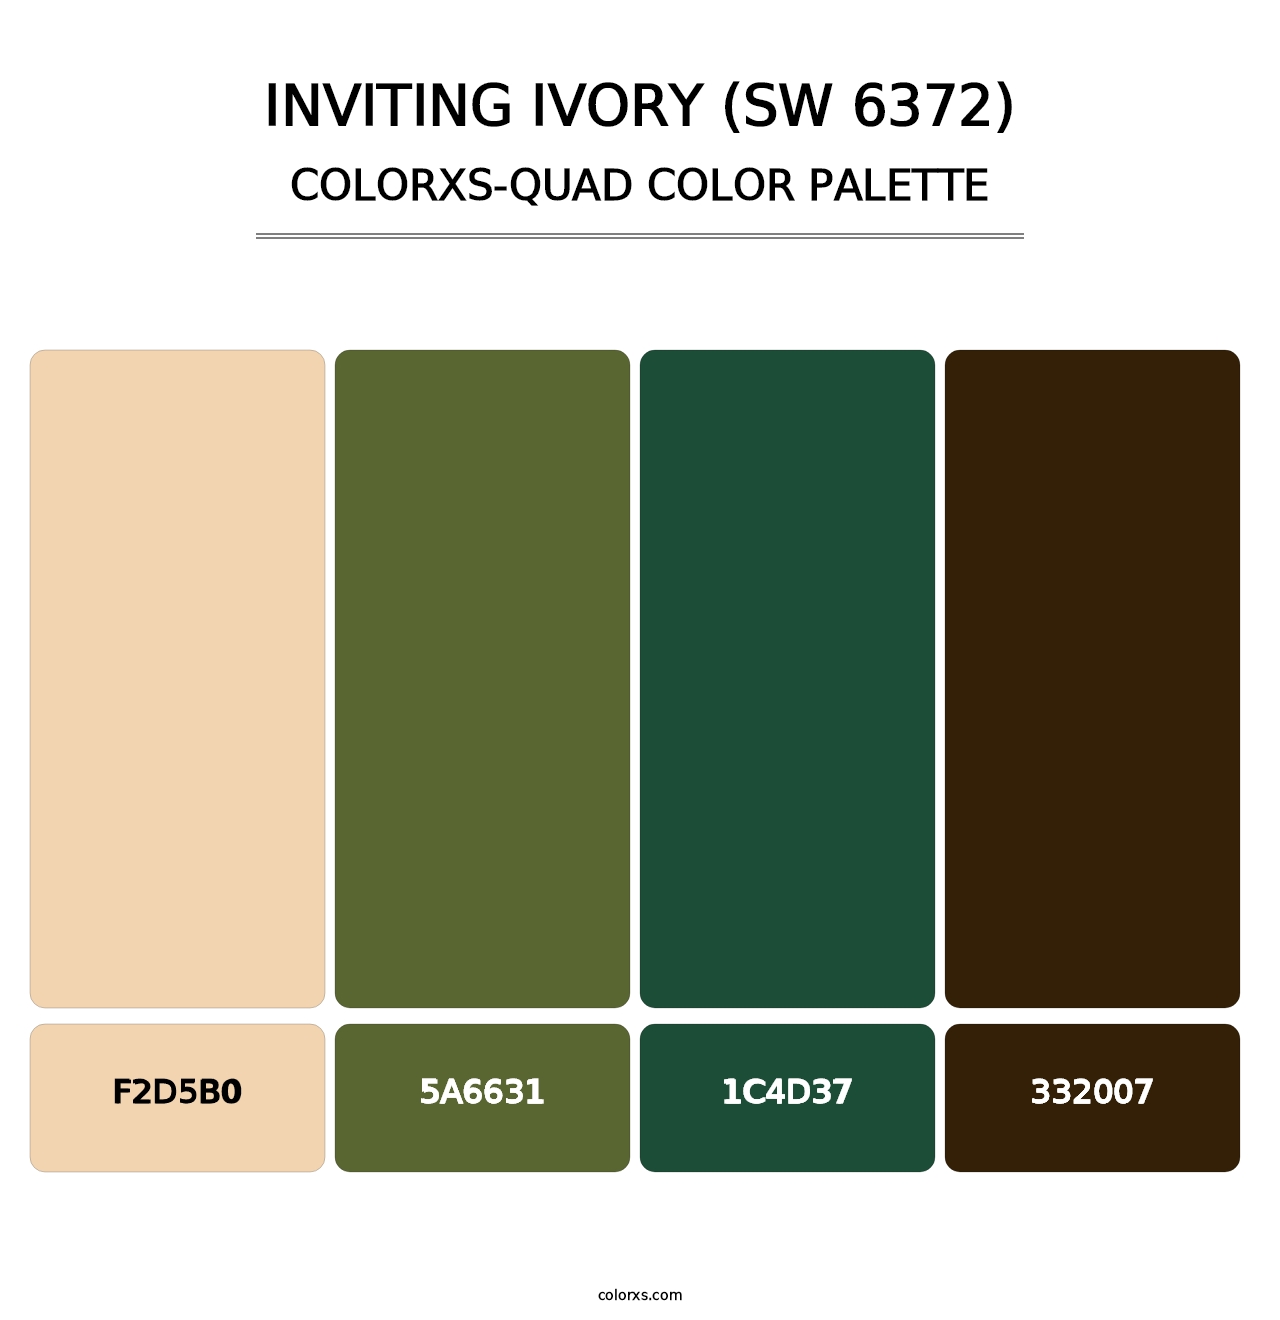 Inviting Ivory (SW 6372) - Colorxs Quad Palette